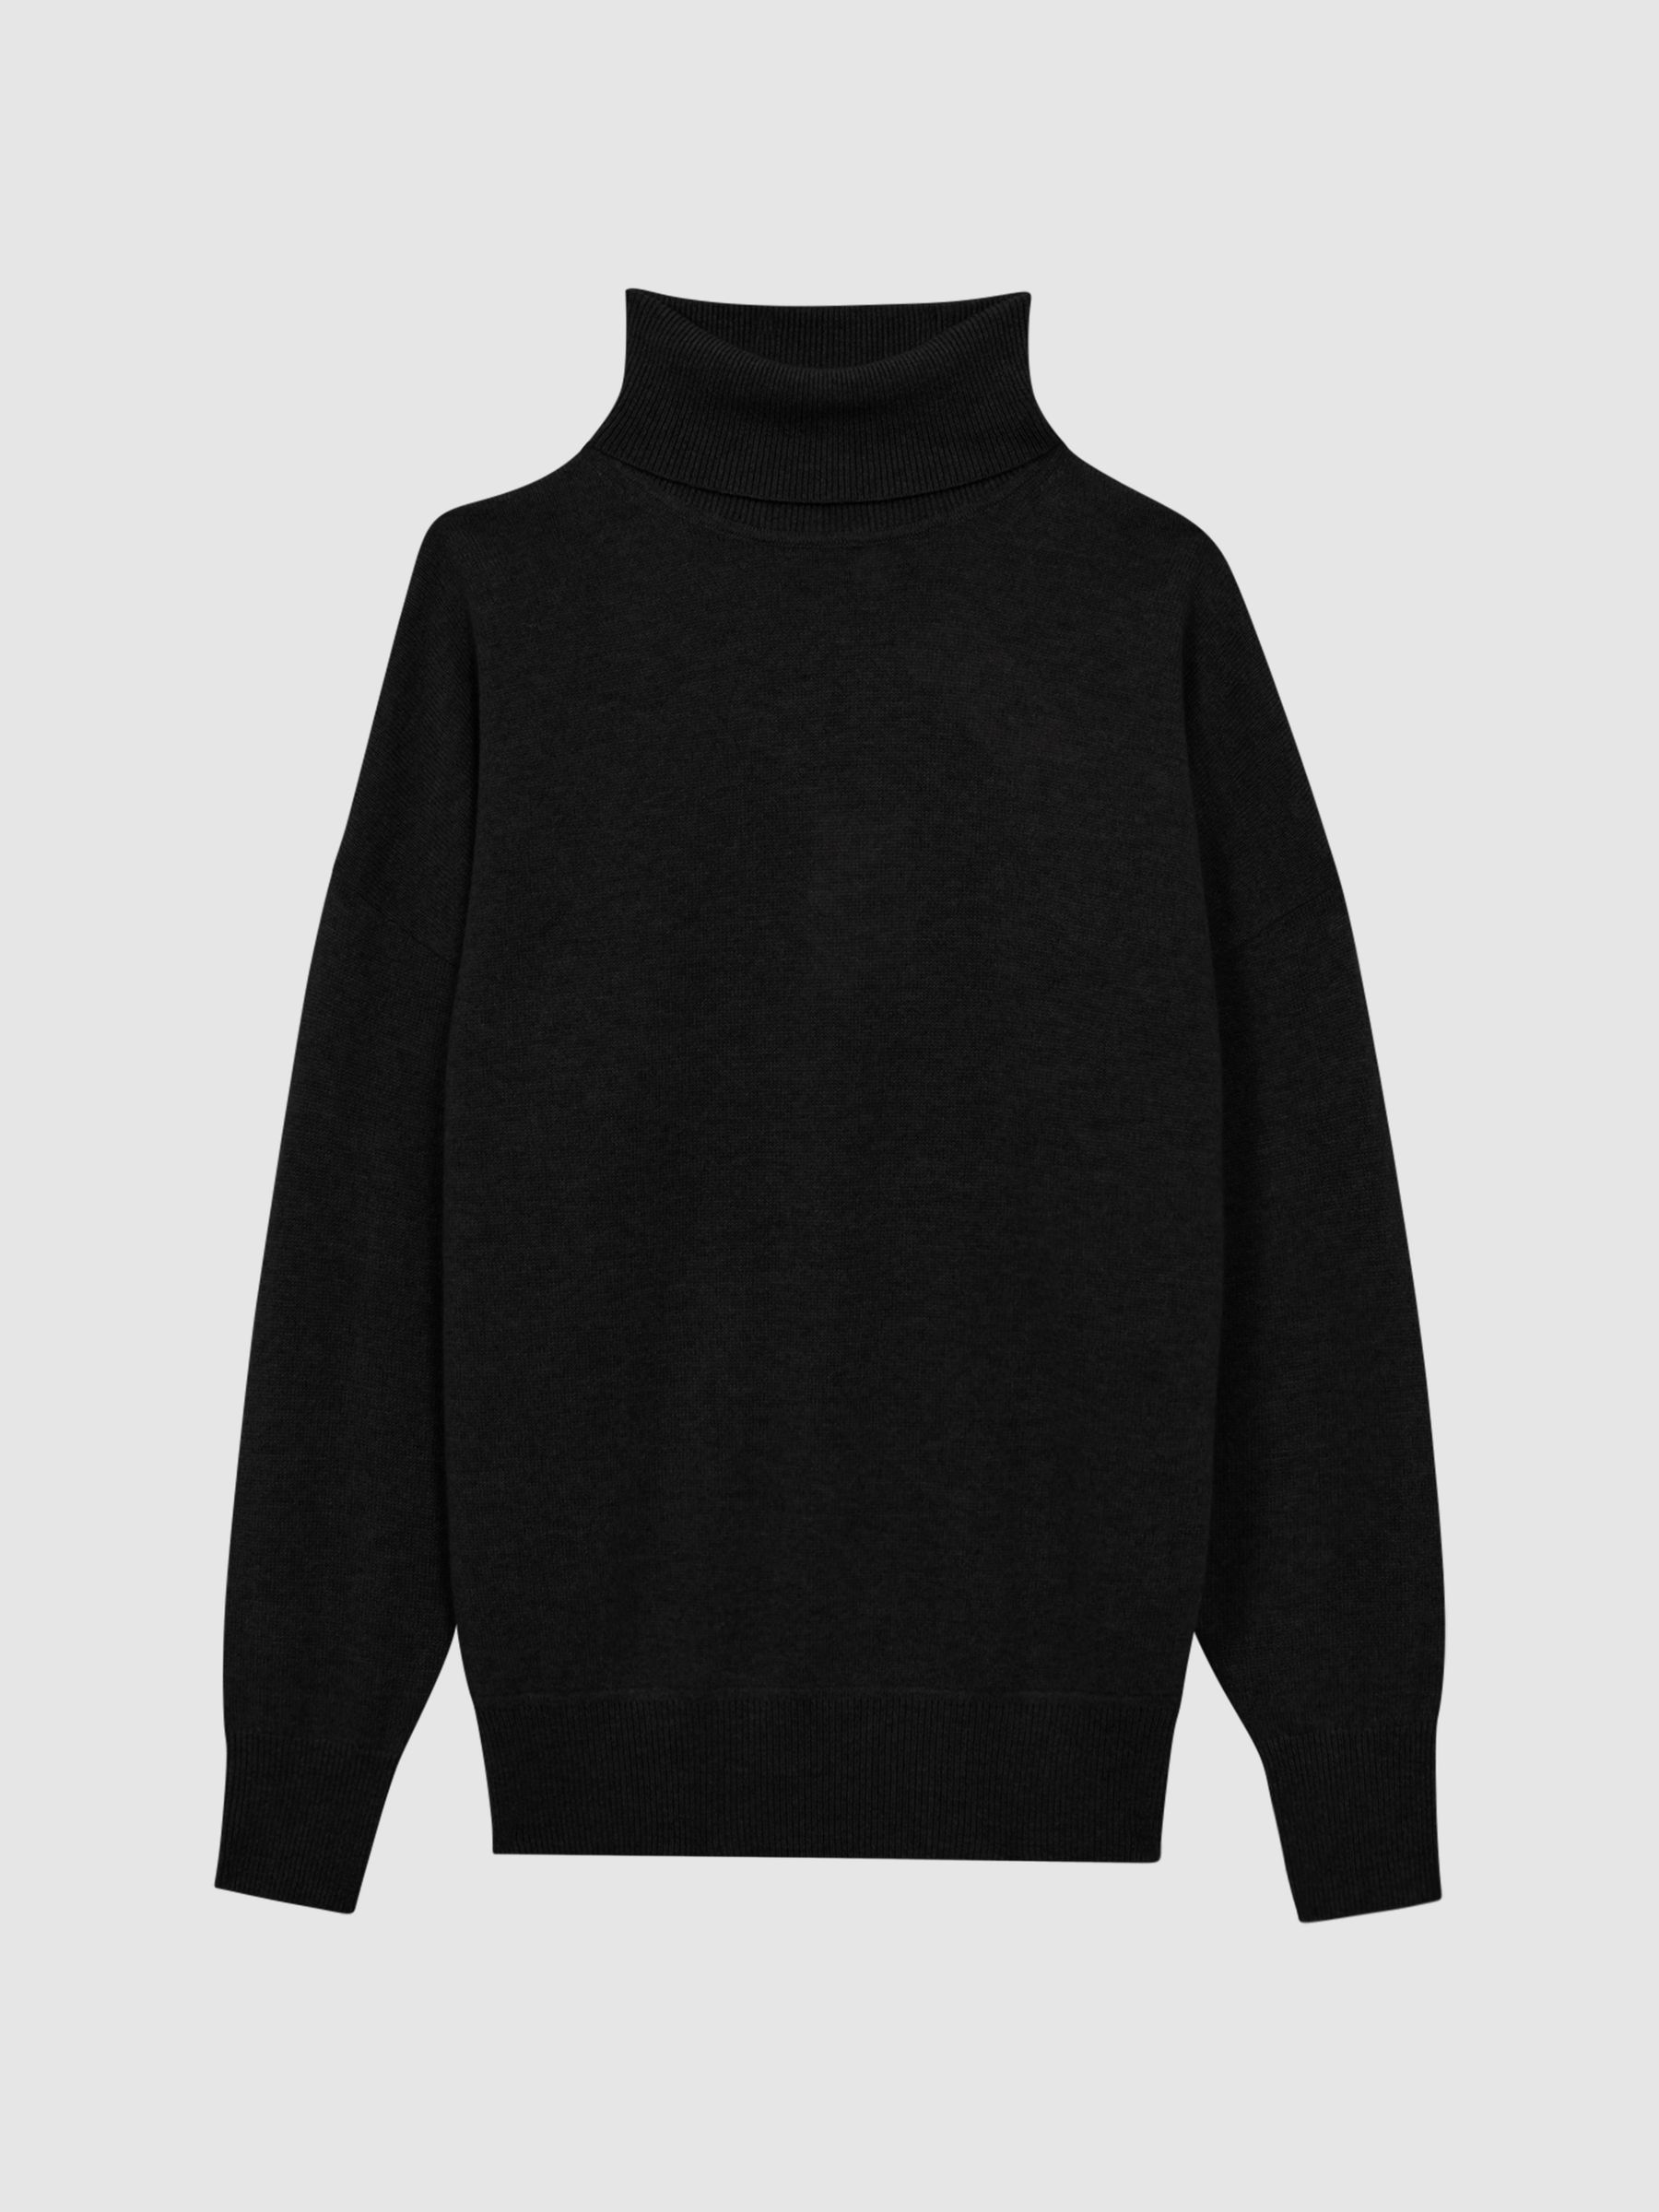 Reiss Mabel Fitted Cashmere Roll Neck Top - REISS